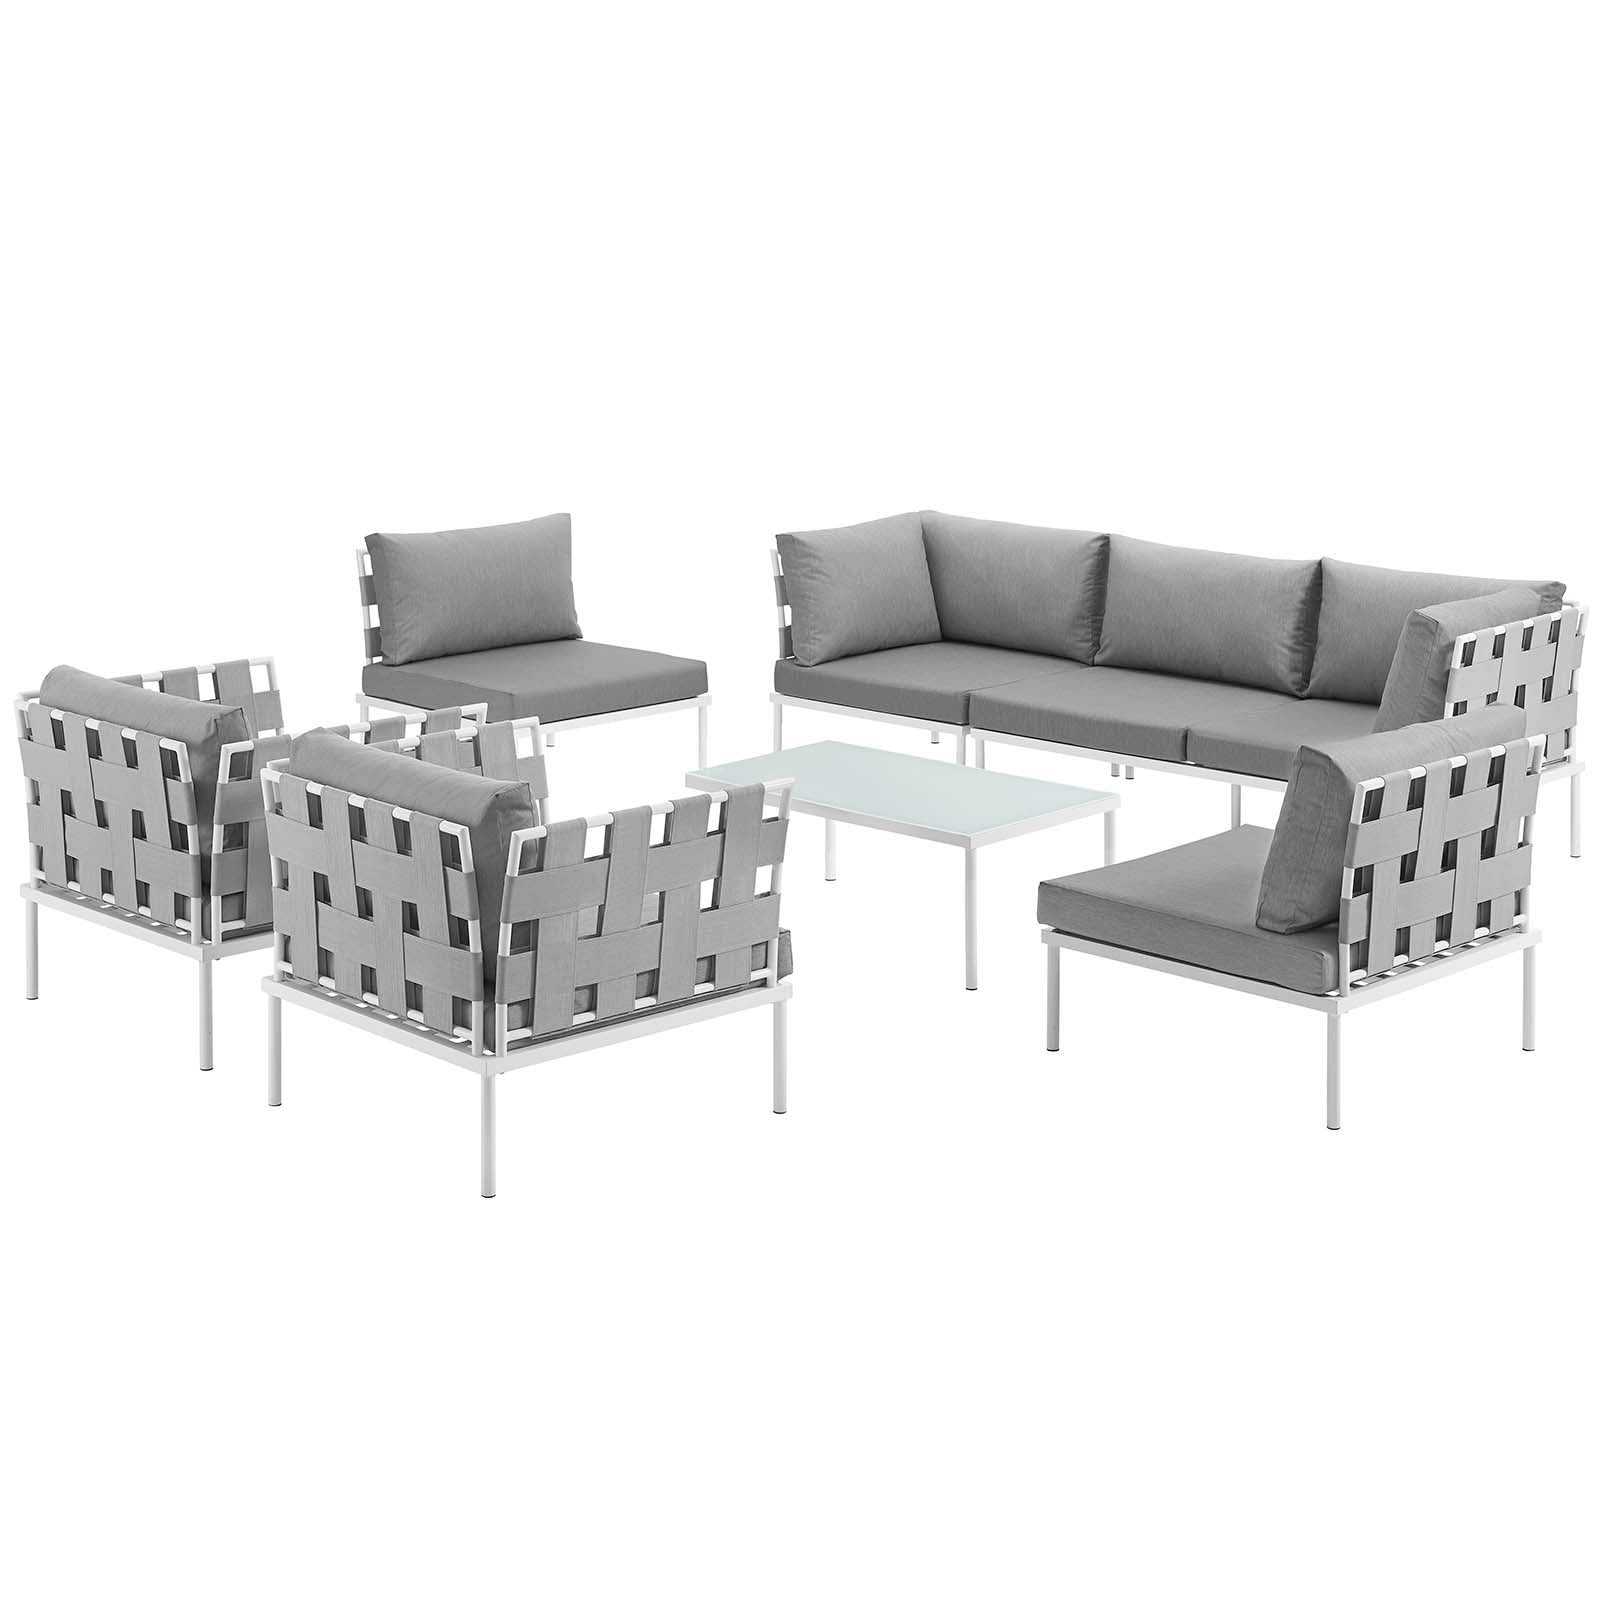 Modway Outdoor Conversation Sets - Harmony 8 Piece Outdoor Patio Sectional Sofa Set White & Gray